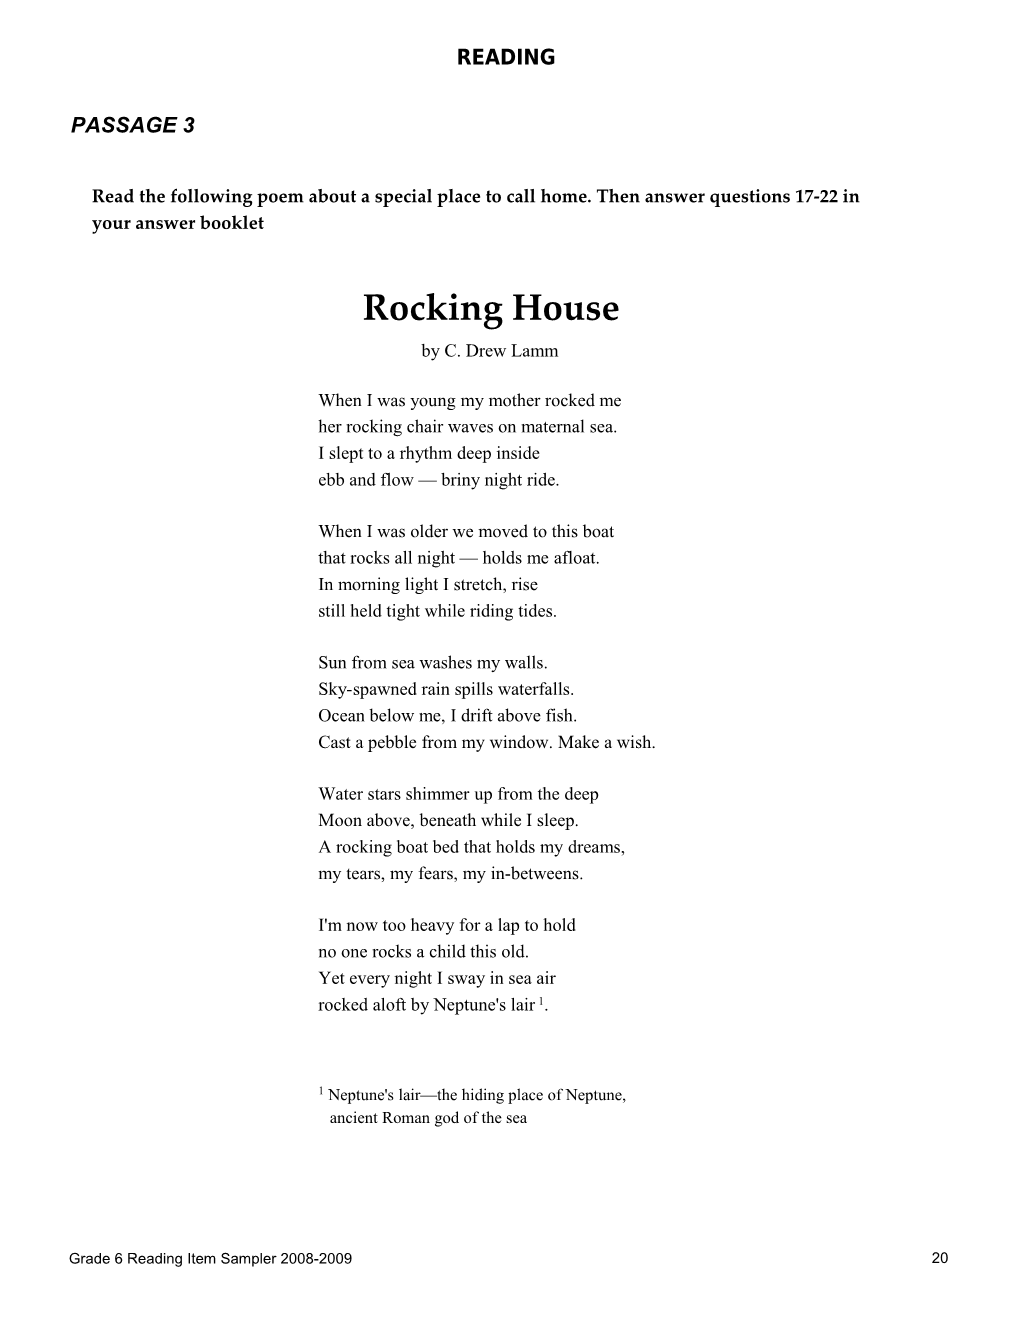 Read the Following Poem About a Special Place to Call Home. Then Answer Questions 17-22 In